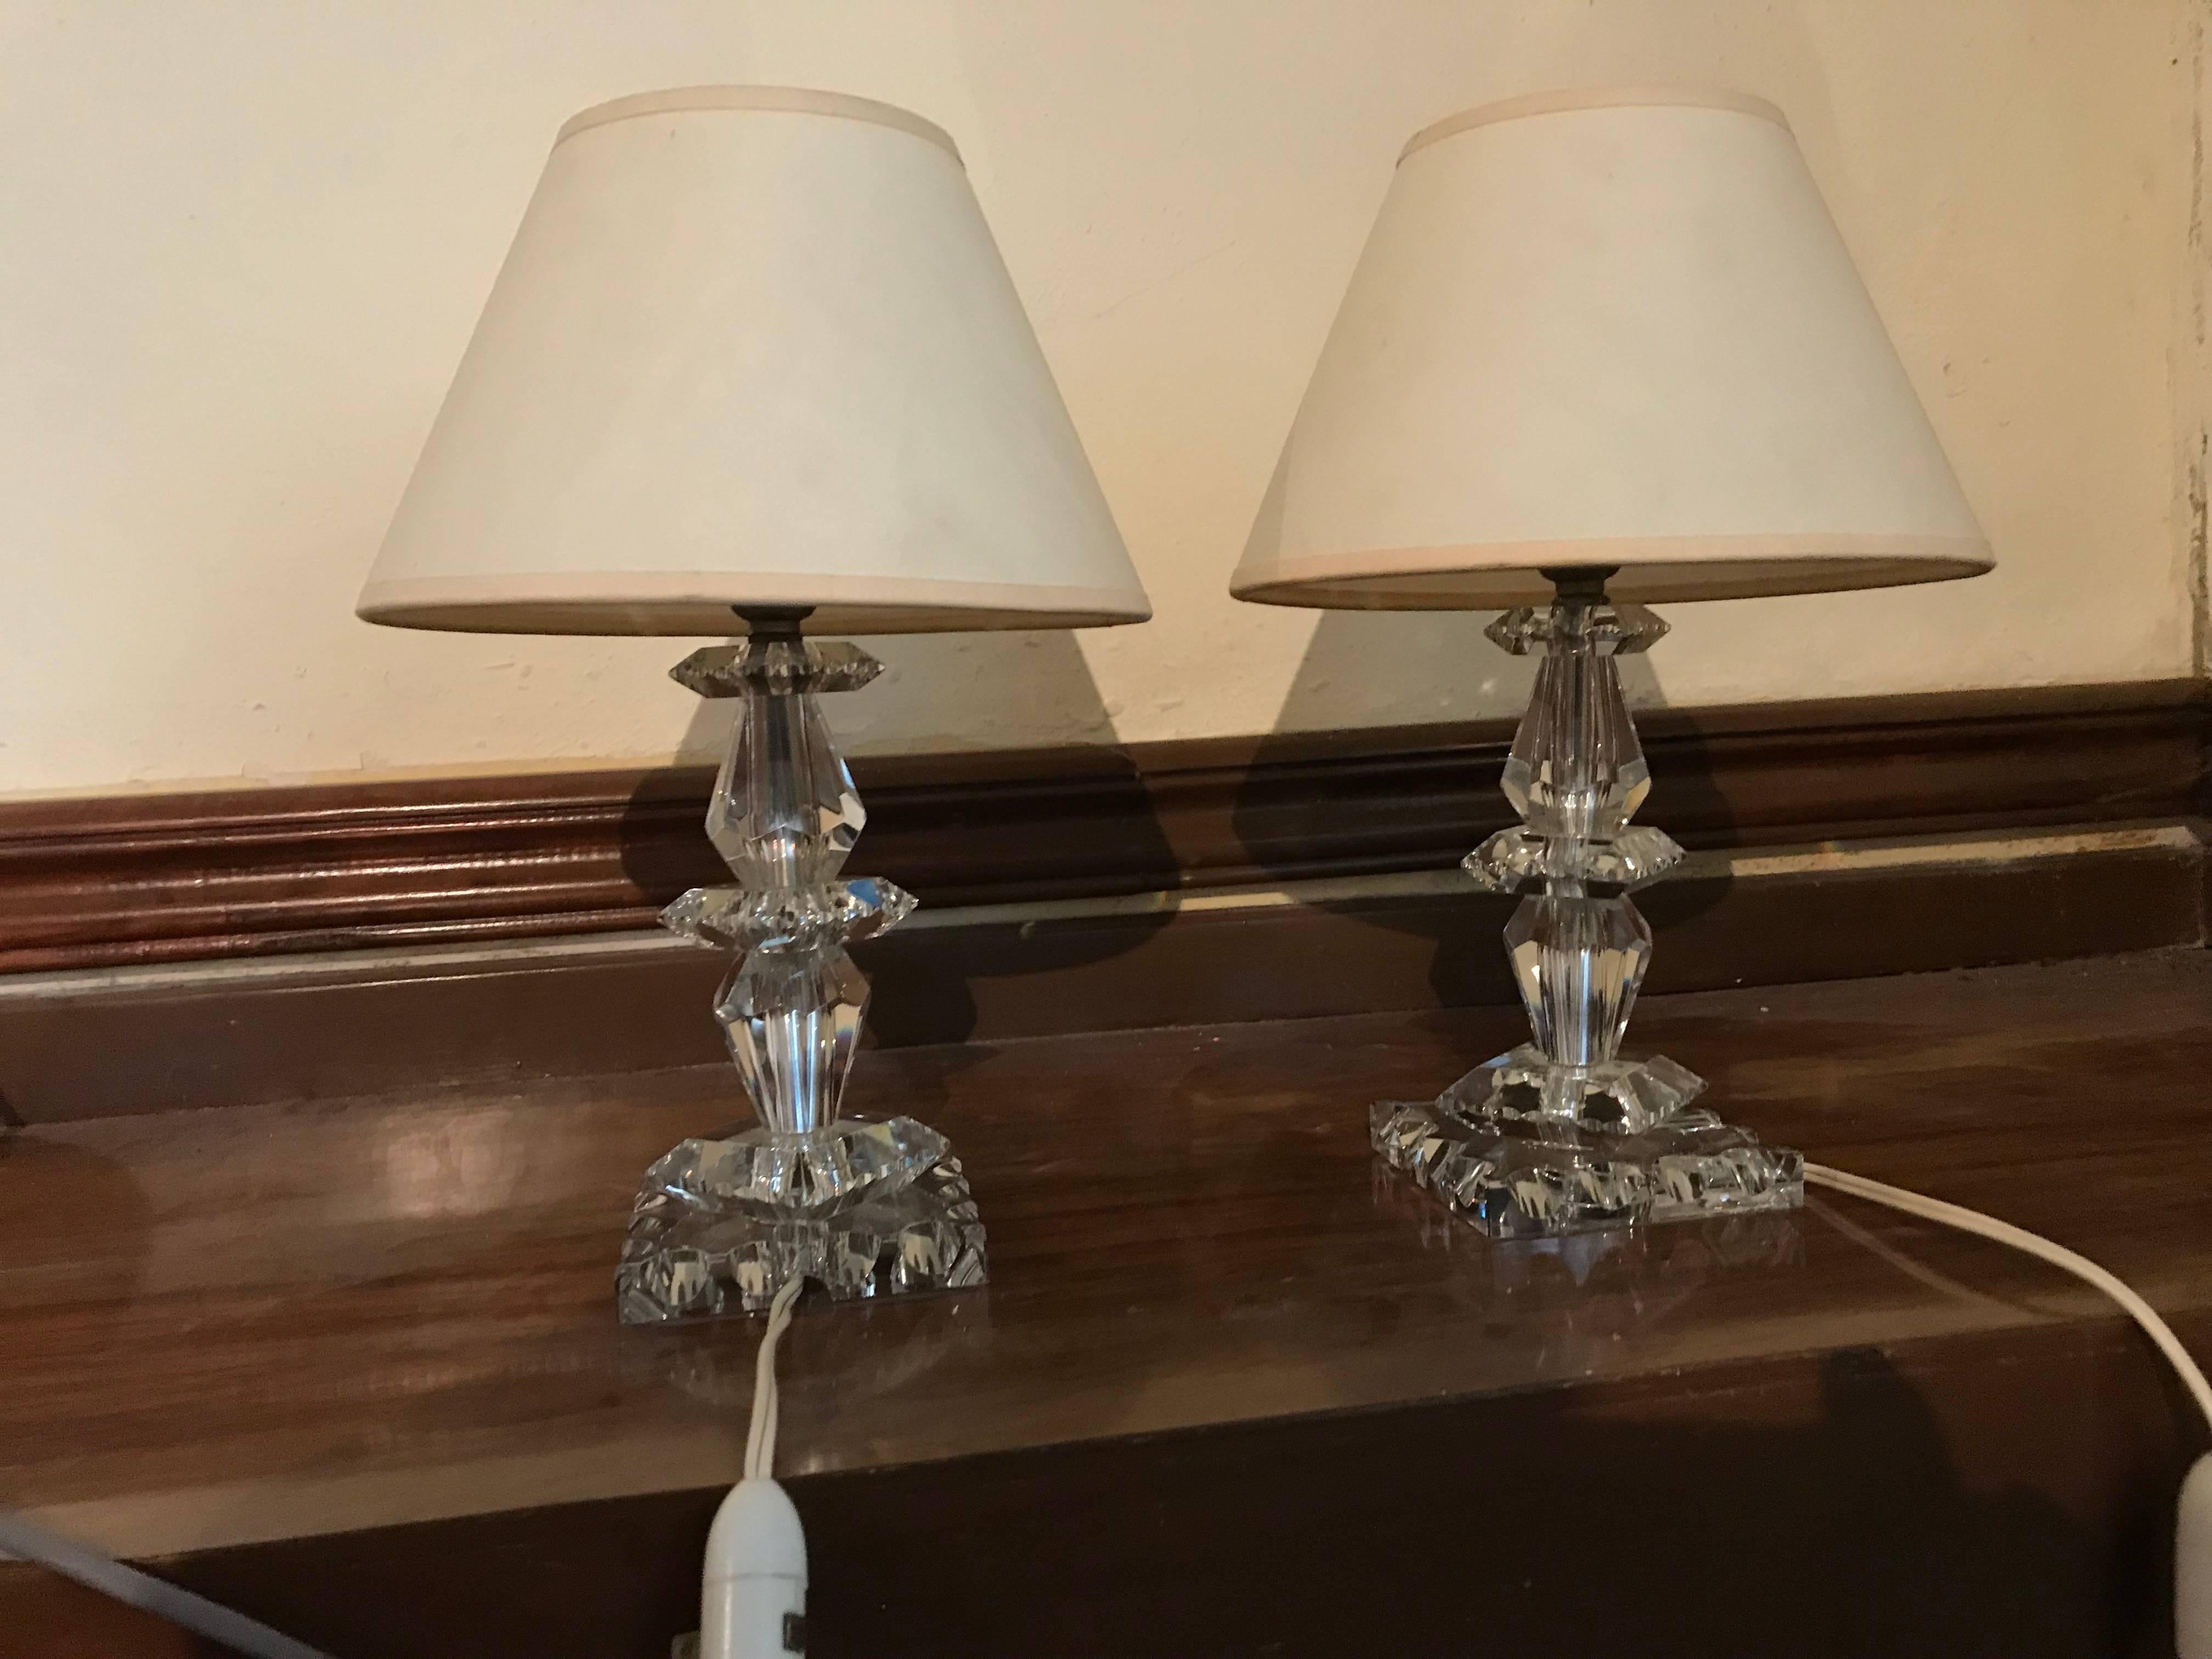 Beautiful pair of table lamps by Baccarat, France in hand cut Lead glass, circa 1940
Both of the lamps are in great condition with no chips or breaks and both signed with the ´Baccarat´ acid etched mark.
Lampshade’s are not included. 
Measurements